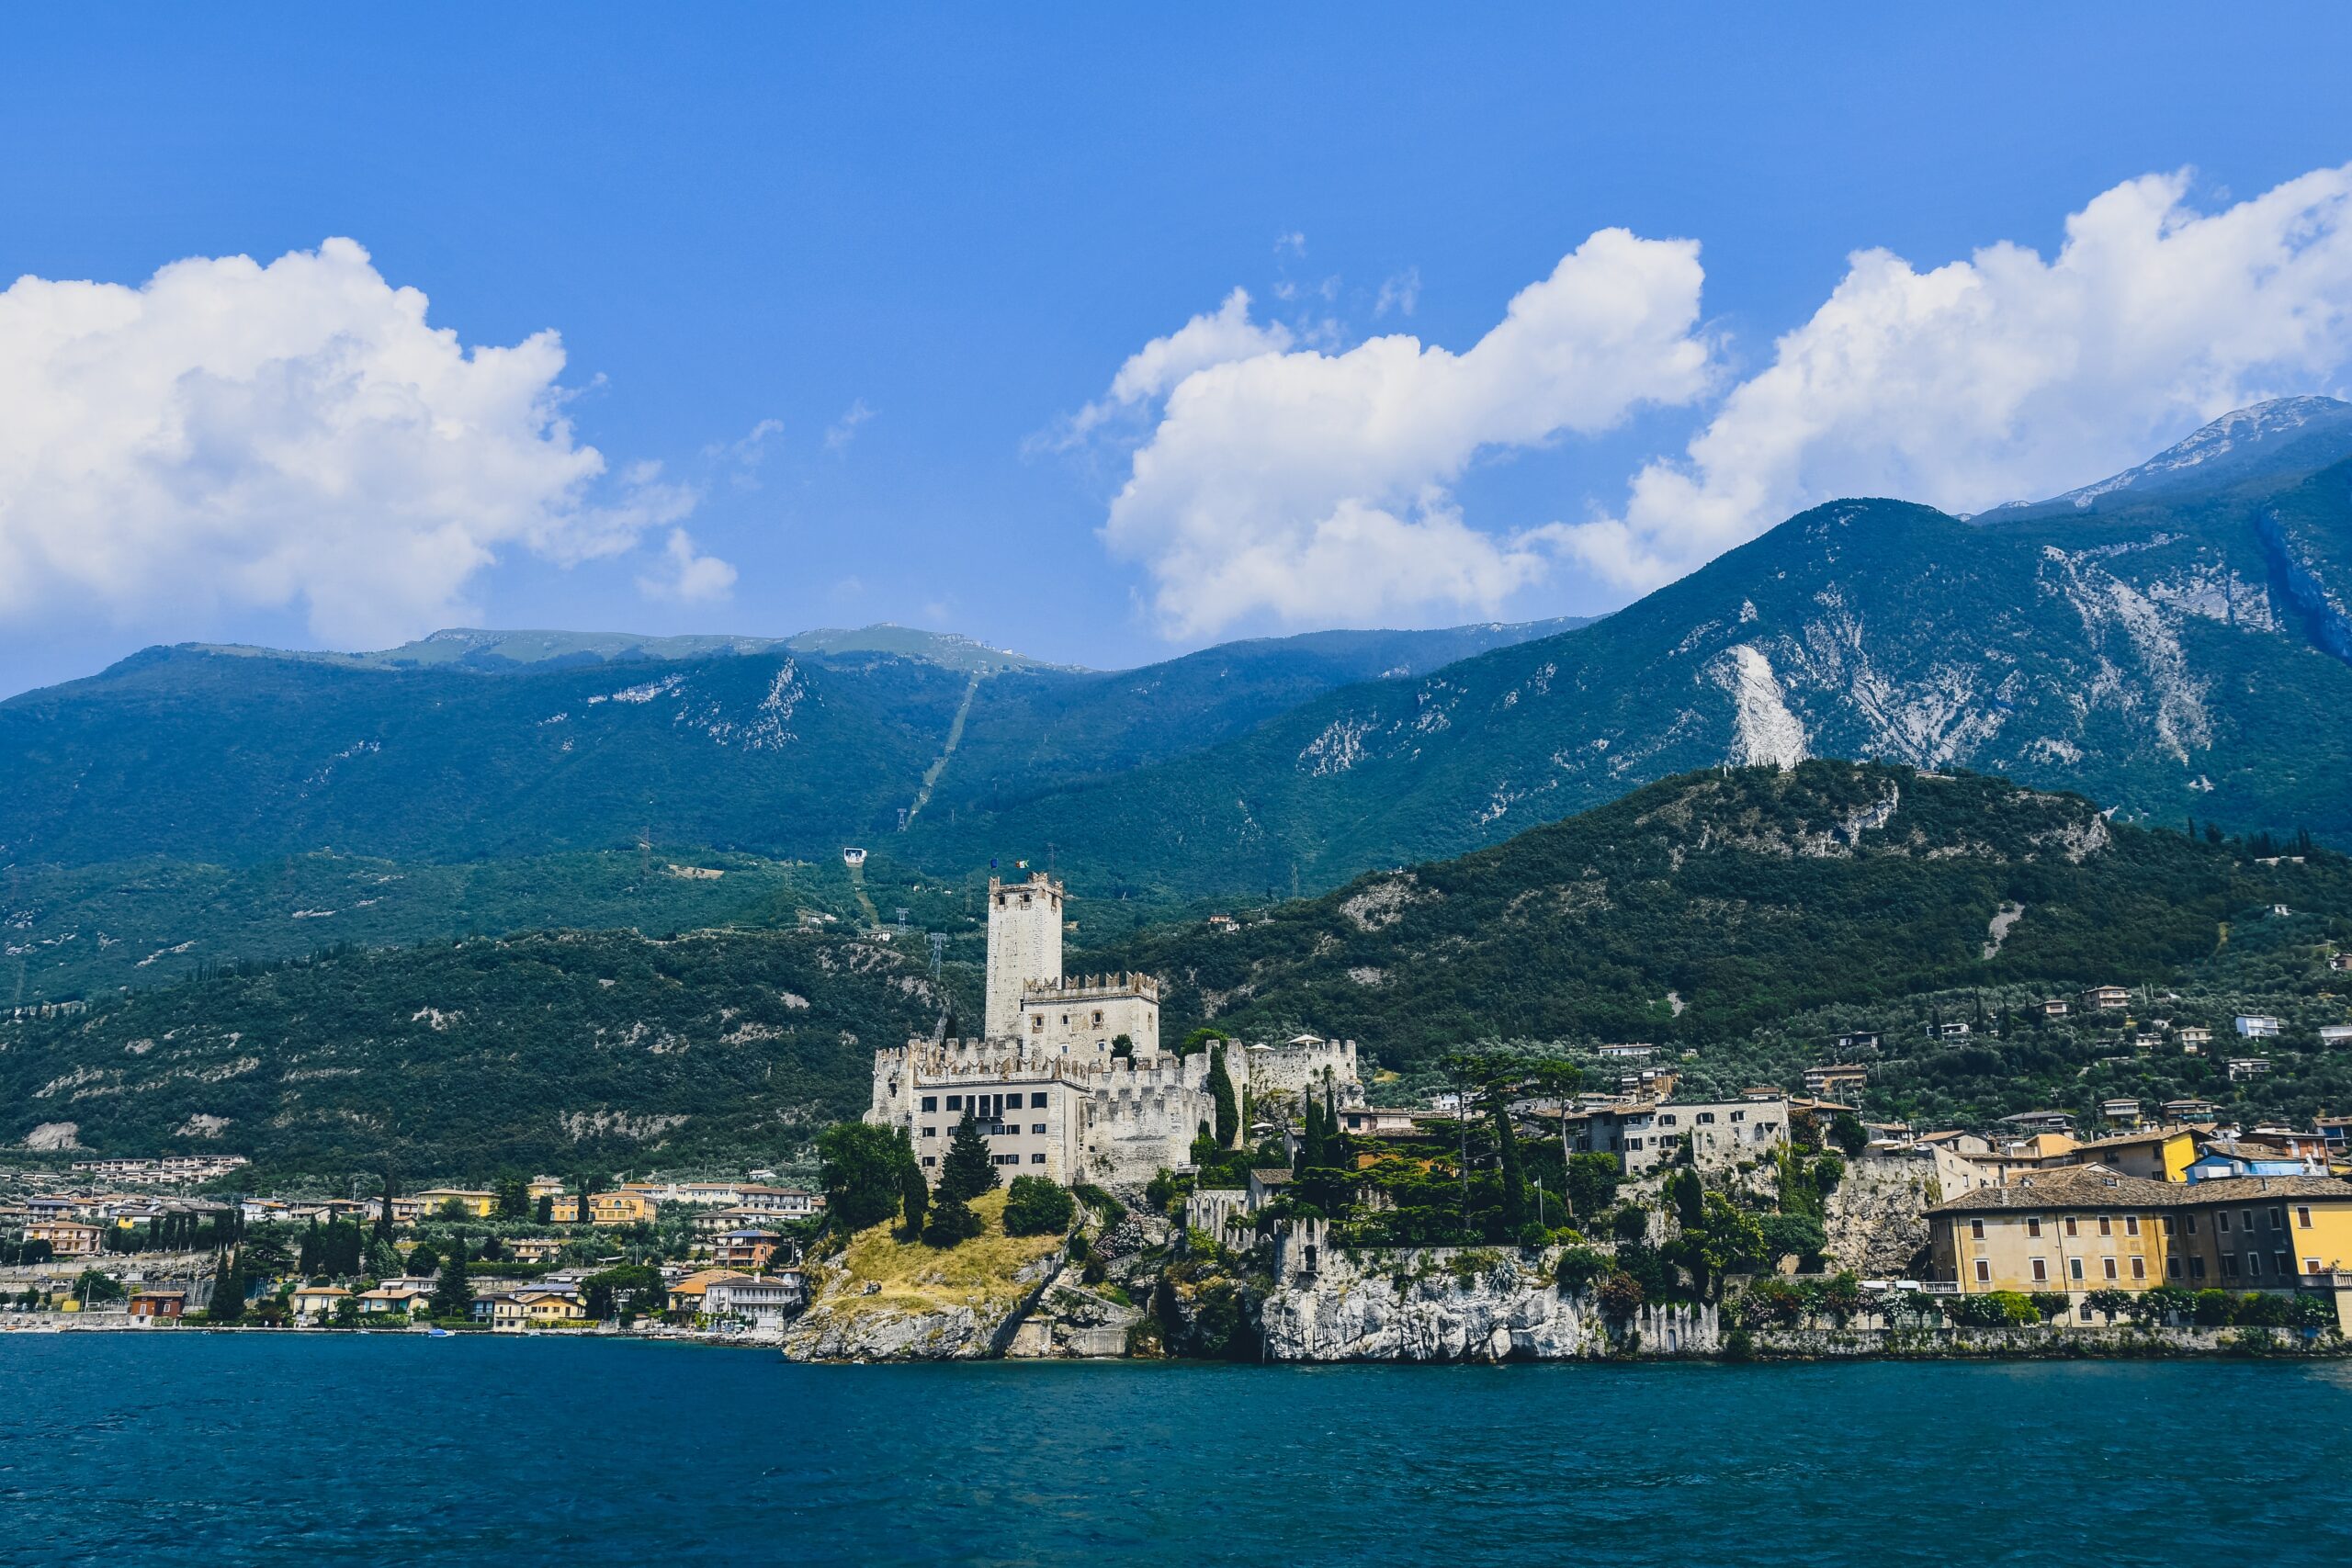 Town and castle of Malcesine against mountains blue sky and a lake